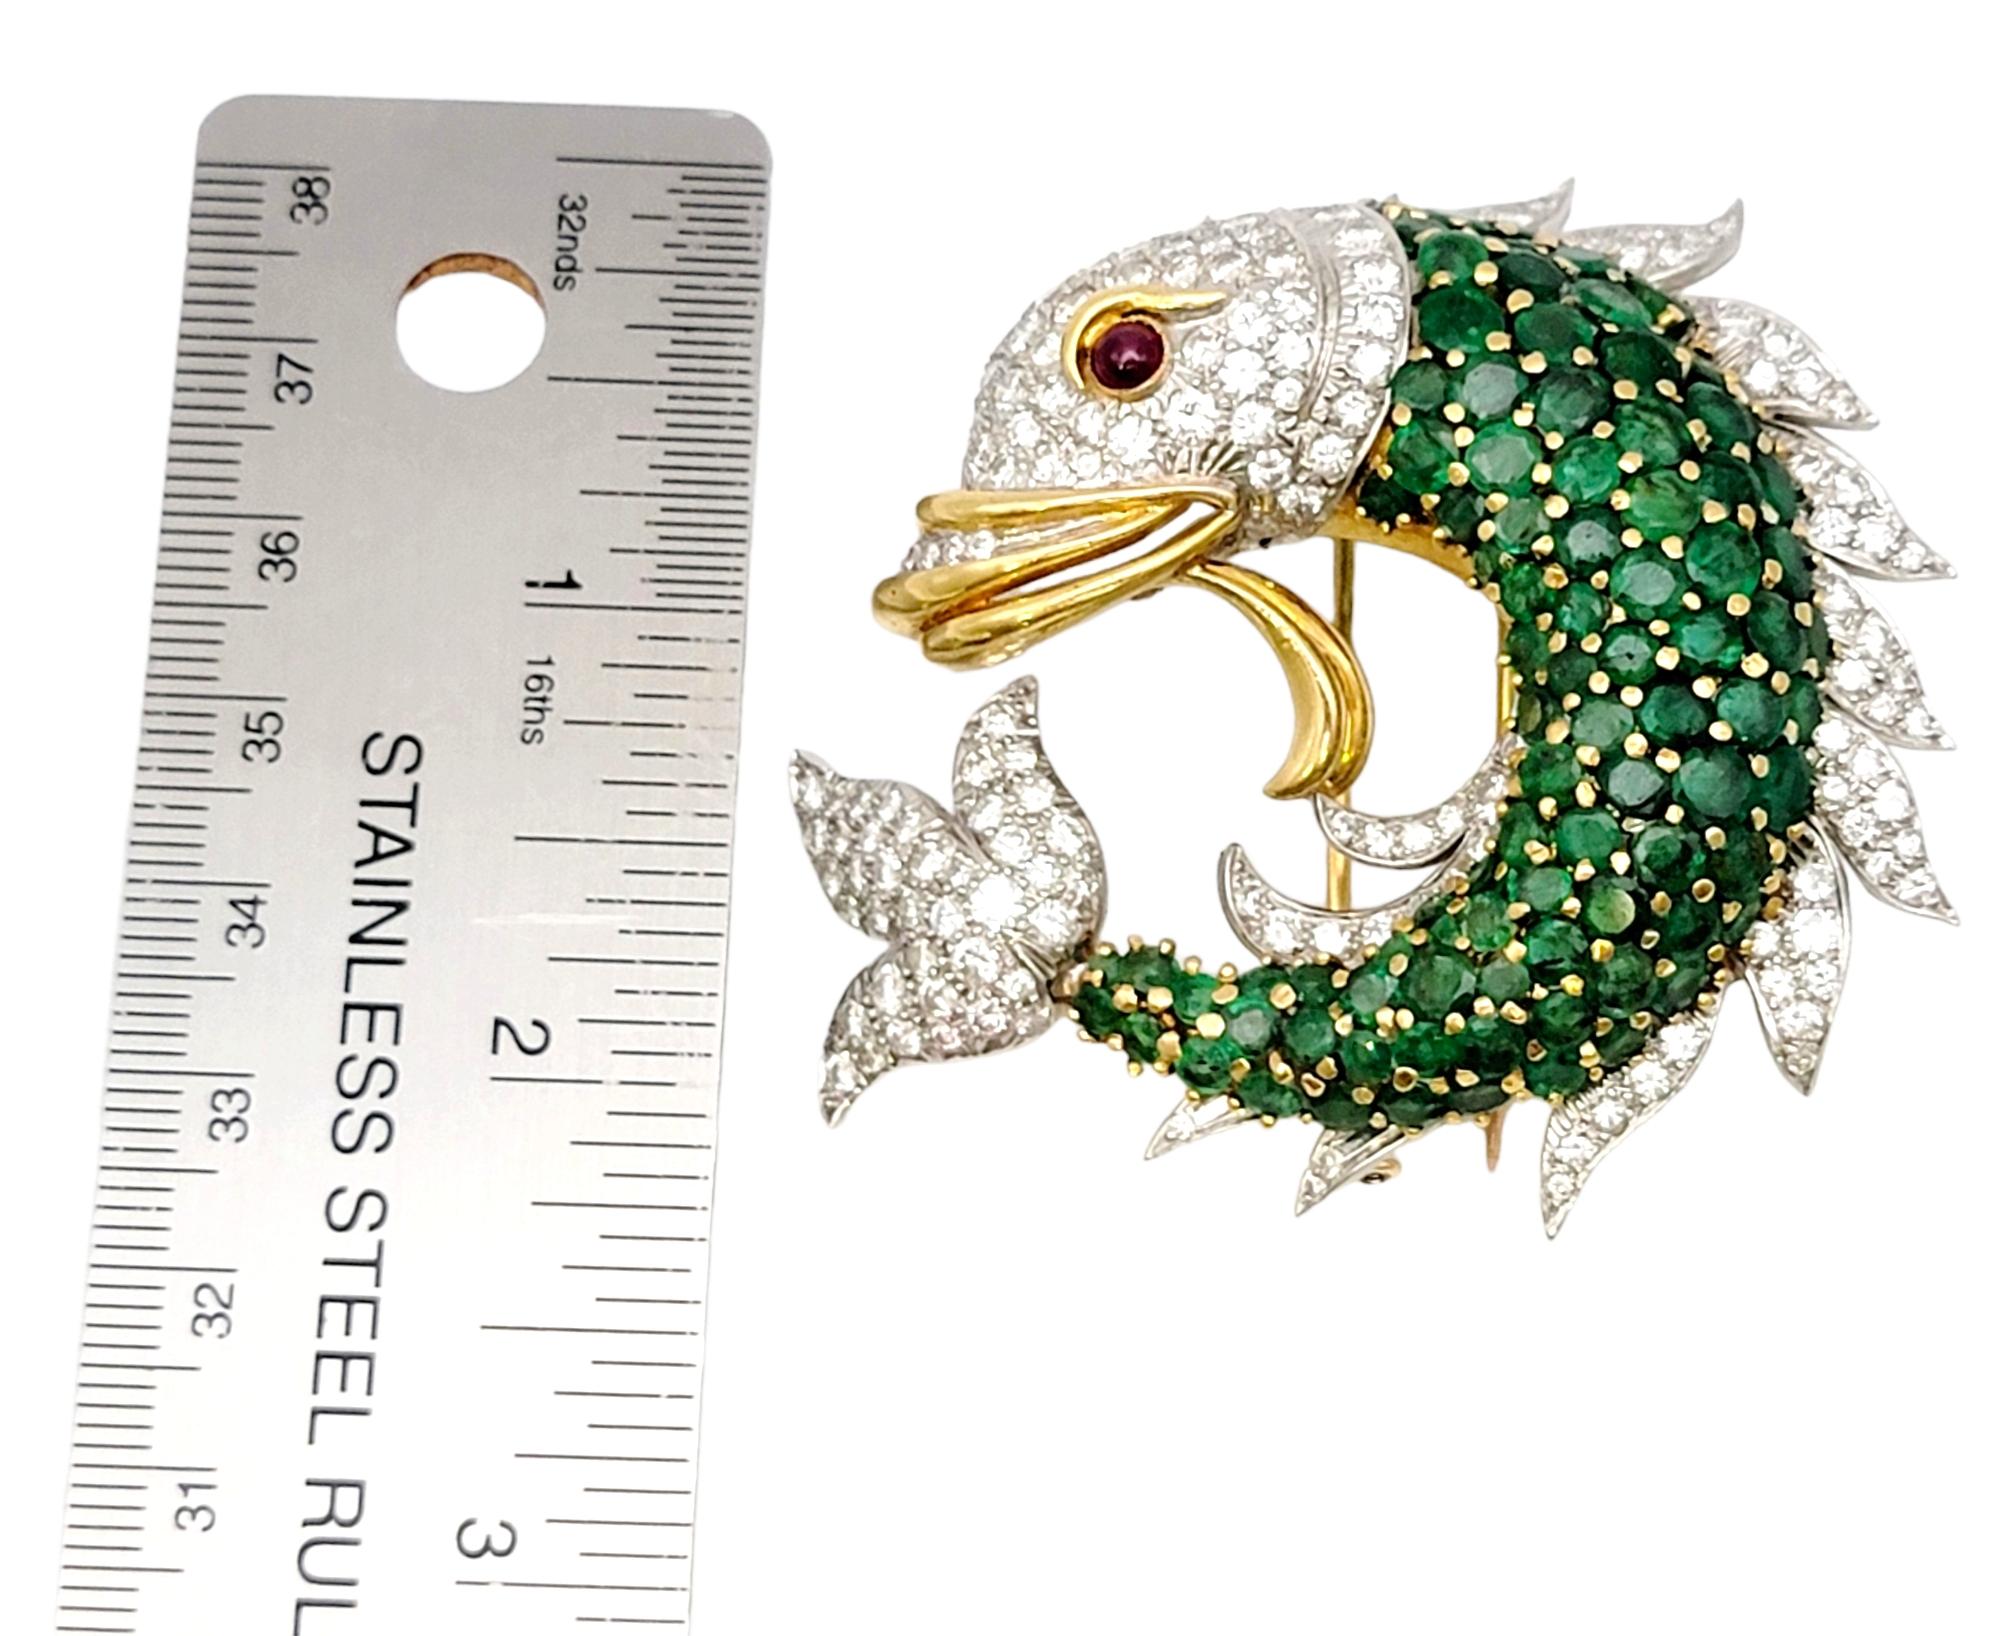 20.50 Carats Total Emerald, Diamond and Ruby Fish Brooch in 18 Karat Gold  For Sale 8